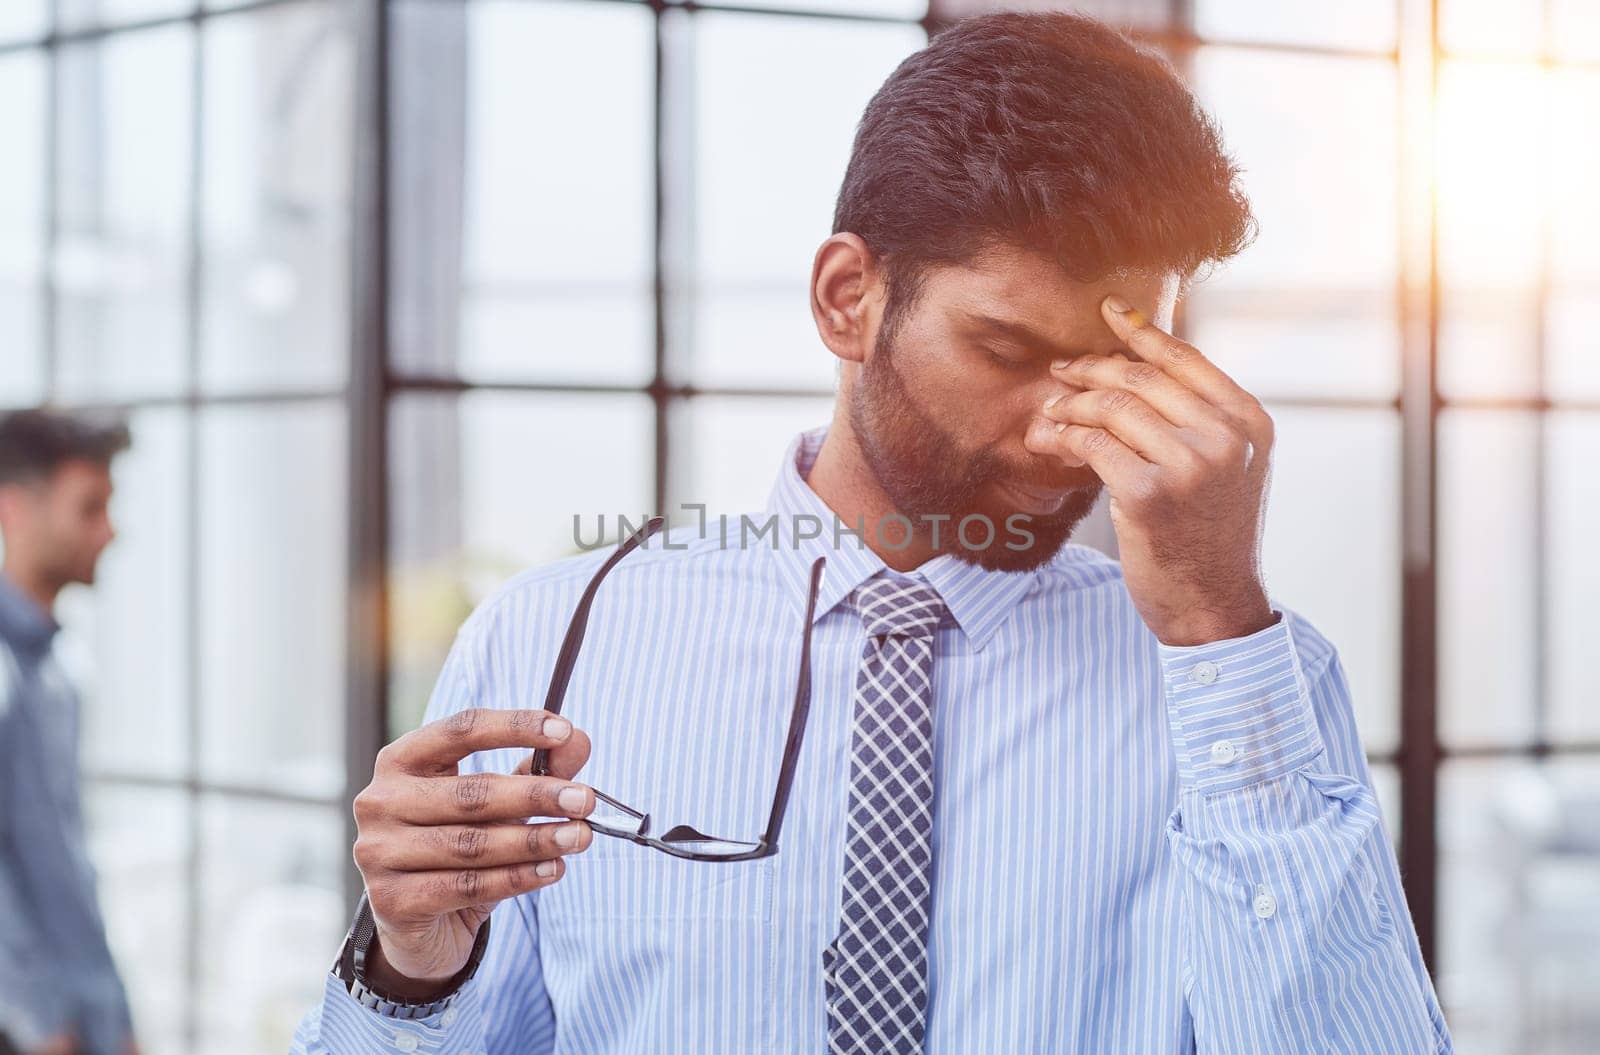 A businessman in a blue shirt and with glasses in his hand rubs his eyes from fatigue